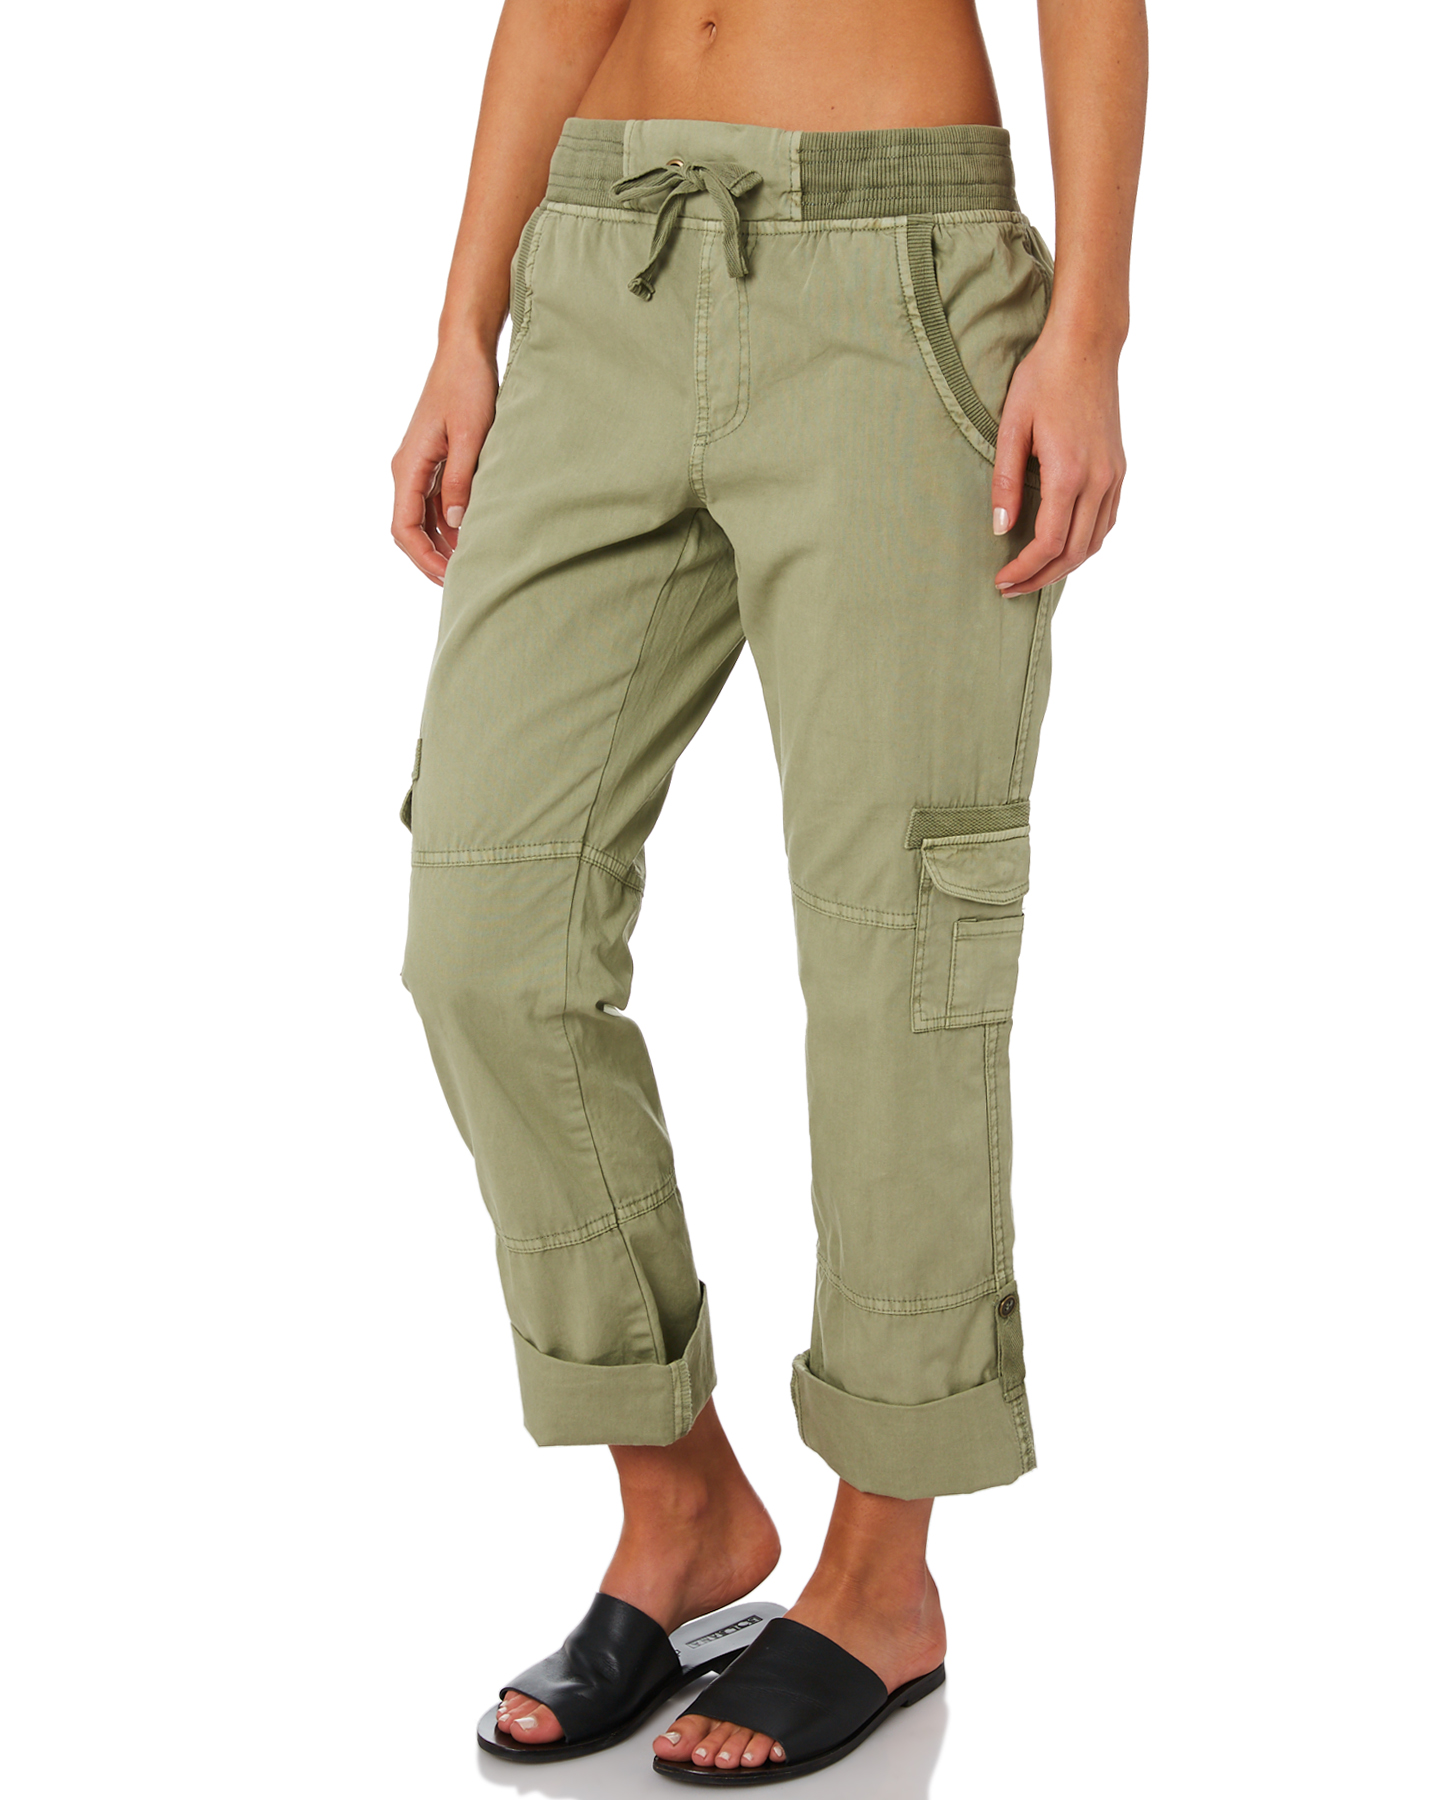 Swell Kailey Pant - Khaki | SurfStitch